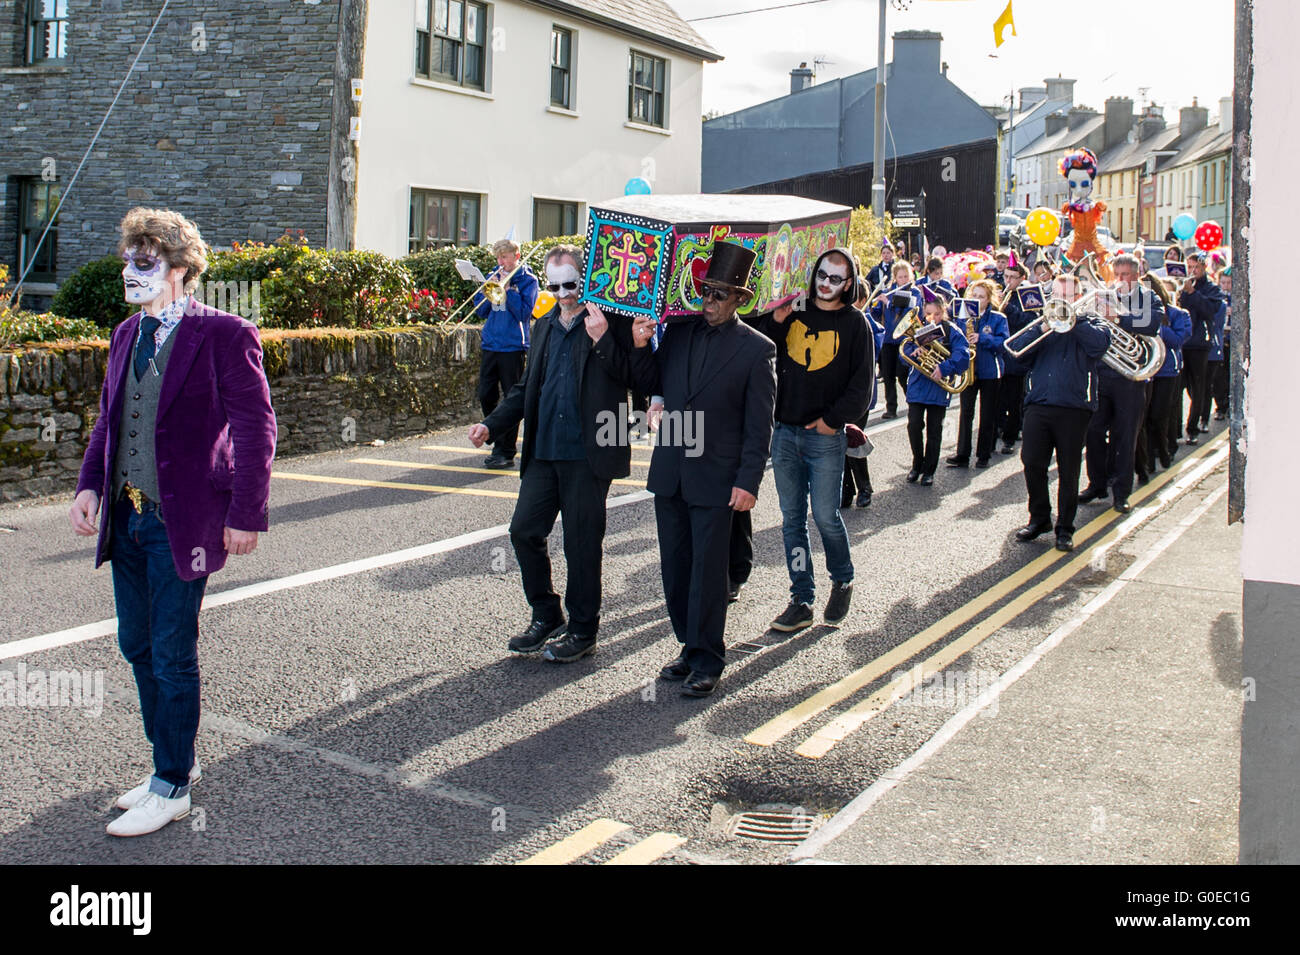 Ballydehob, Ireland. 30th April 2016. With Darragh Regan from Cork as the Funeral Director, the procession makes its way down Ballydehob Main Street during the Ballydehob Jazz Festival 'Day of the Dead' themed New Orleans Style Jazz Funeral. Credit: Andy Gibson/Alamy Live News Stock Photo